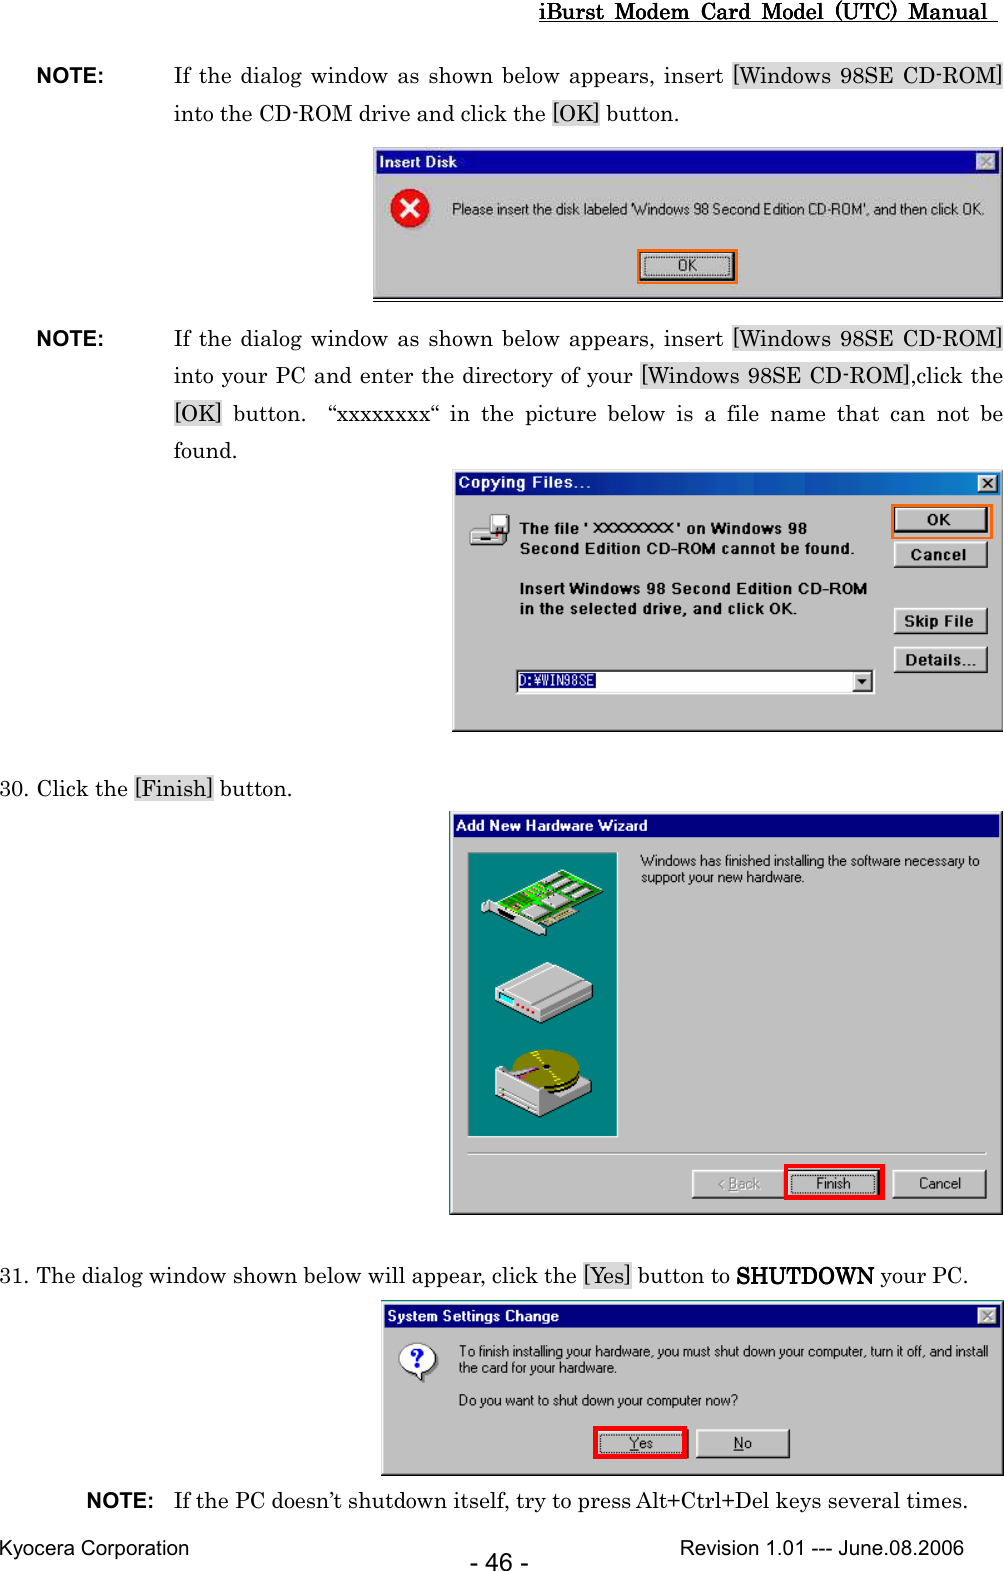 iBurst  Modem  Card  Model  (UTC)  Manual iBurst  Modem  Card  Model  (UTC)  Manual iBurst  Modem  Card  Model  (UTC)  Manual iBurst  Modem  Card  Model  (UTC)  Manual       Kyocera Corporation                                                                                              Revision 1.01 --- June.08.2006 - 46 - NOTE:  If the dialog window as shown below appears, insert [Windows 98SE CD-ROM] into the CD-ROM drive and click the [OK] button.  NOTE:  If the dialog window as shown below appears, insert [Windows 98SE CD-ROM] into your PC and enter the directory of your [Windows 98SE CD-ROM],click the [OK]  button.    “xxxxxxxx“  in  the  picture  below  is  a  file  name  that  can  not  be found.   30. Click the [Finish] button.   31. The dialog window shown below will appear, click the [Yes] button to SHUTDOWNSHUTDOWNSHUTDOWNSHUTDOWN your PC.  NOTE:  If the PC doesn’t shutdown itself, try to press Alt+Ctrl+Del keys several times. 